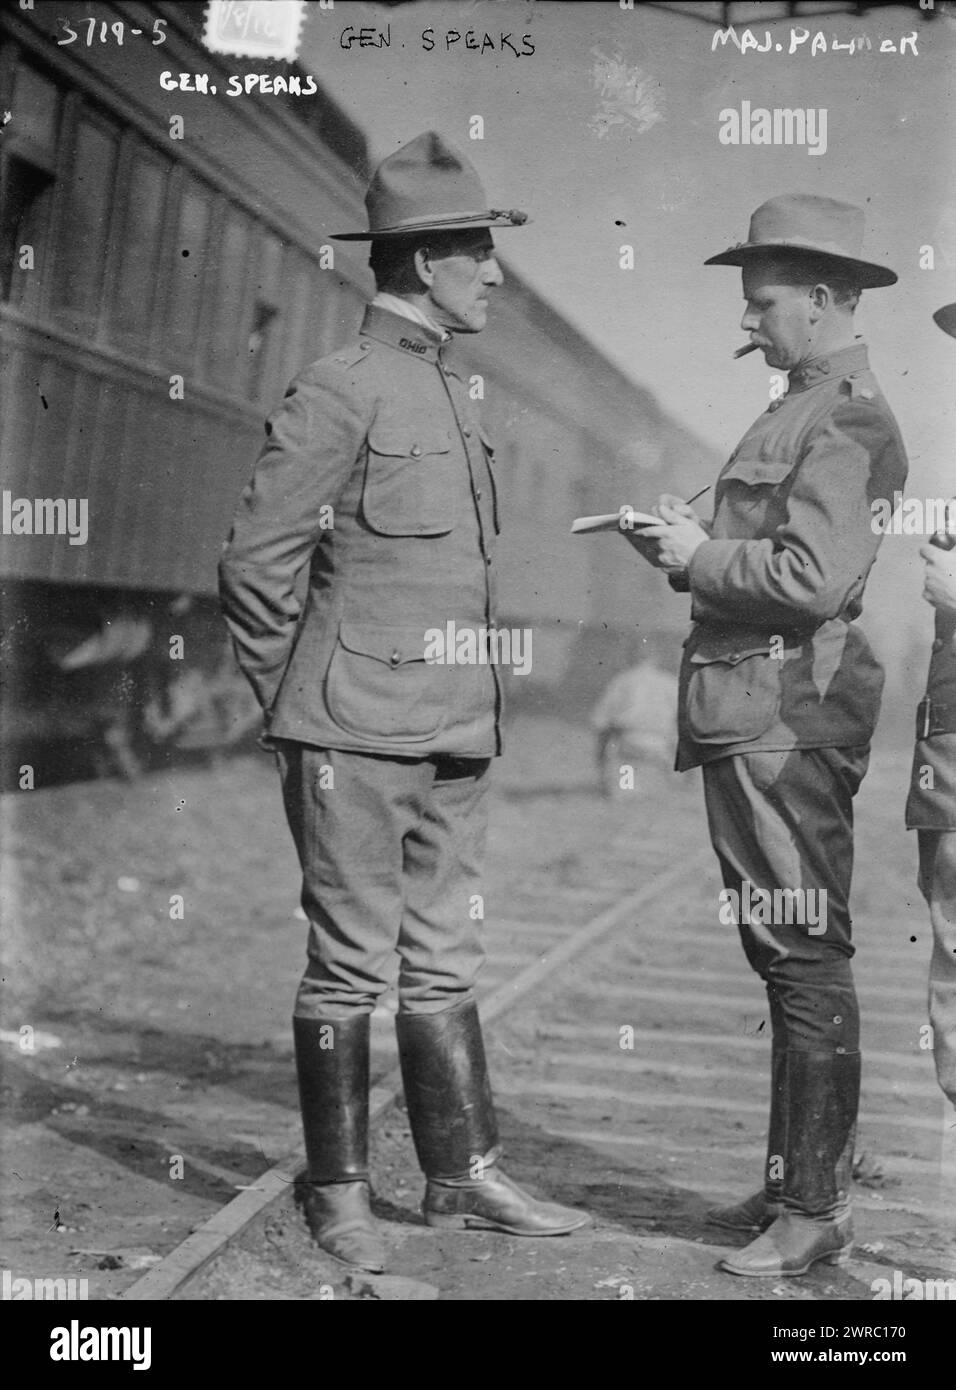 Gen. Speaks, Maj. Palmer, Photograph shows Brigadier-General John C. Speaks (1859-1945), the Commander of the Second Brigade, Ohio National Guard, and Major Robert D. Palmer, Adjutant-General of the Ohio National Guard during the Youngstown steel strike., 1916 Jan. 8, Glass negatives, 1 negative: glass Stock Photo